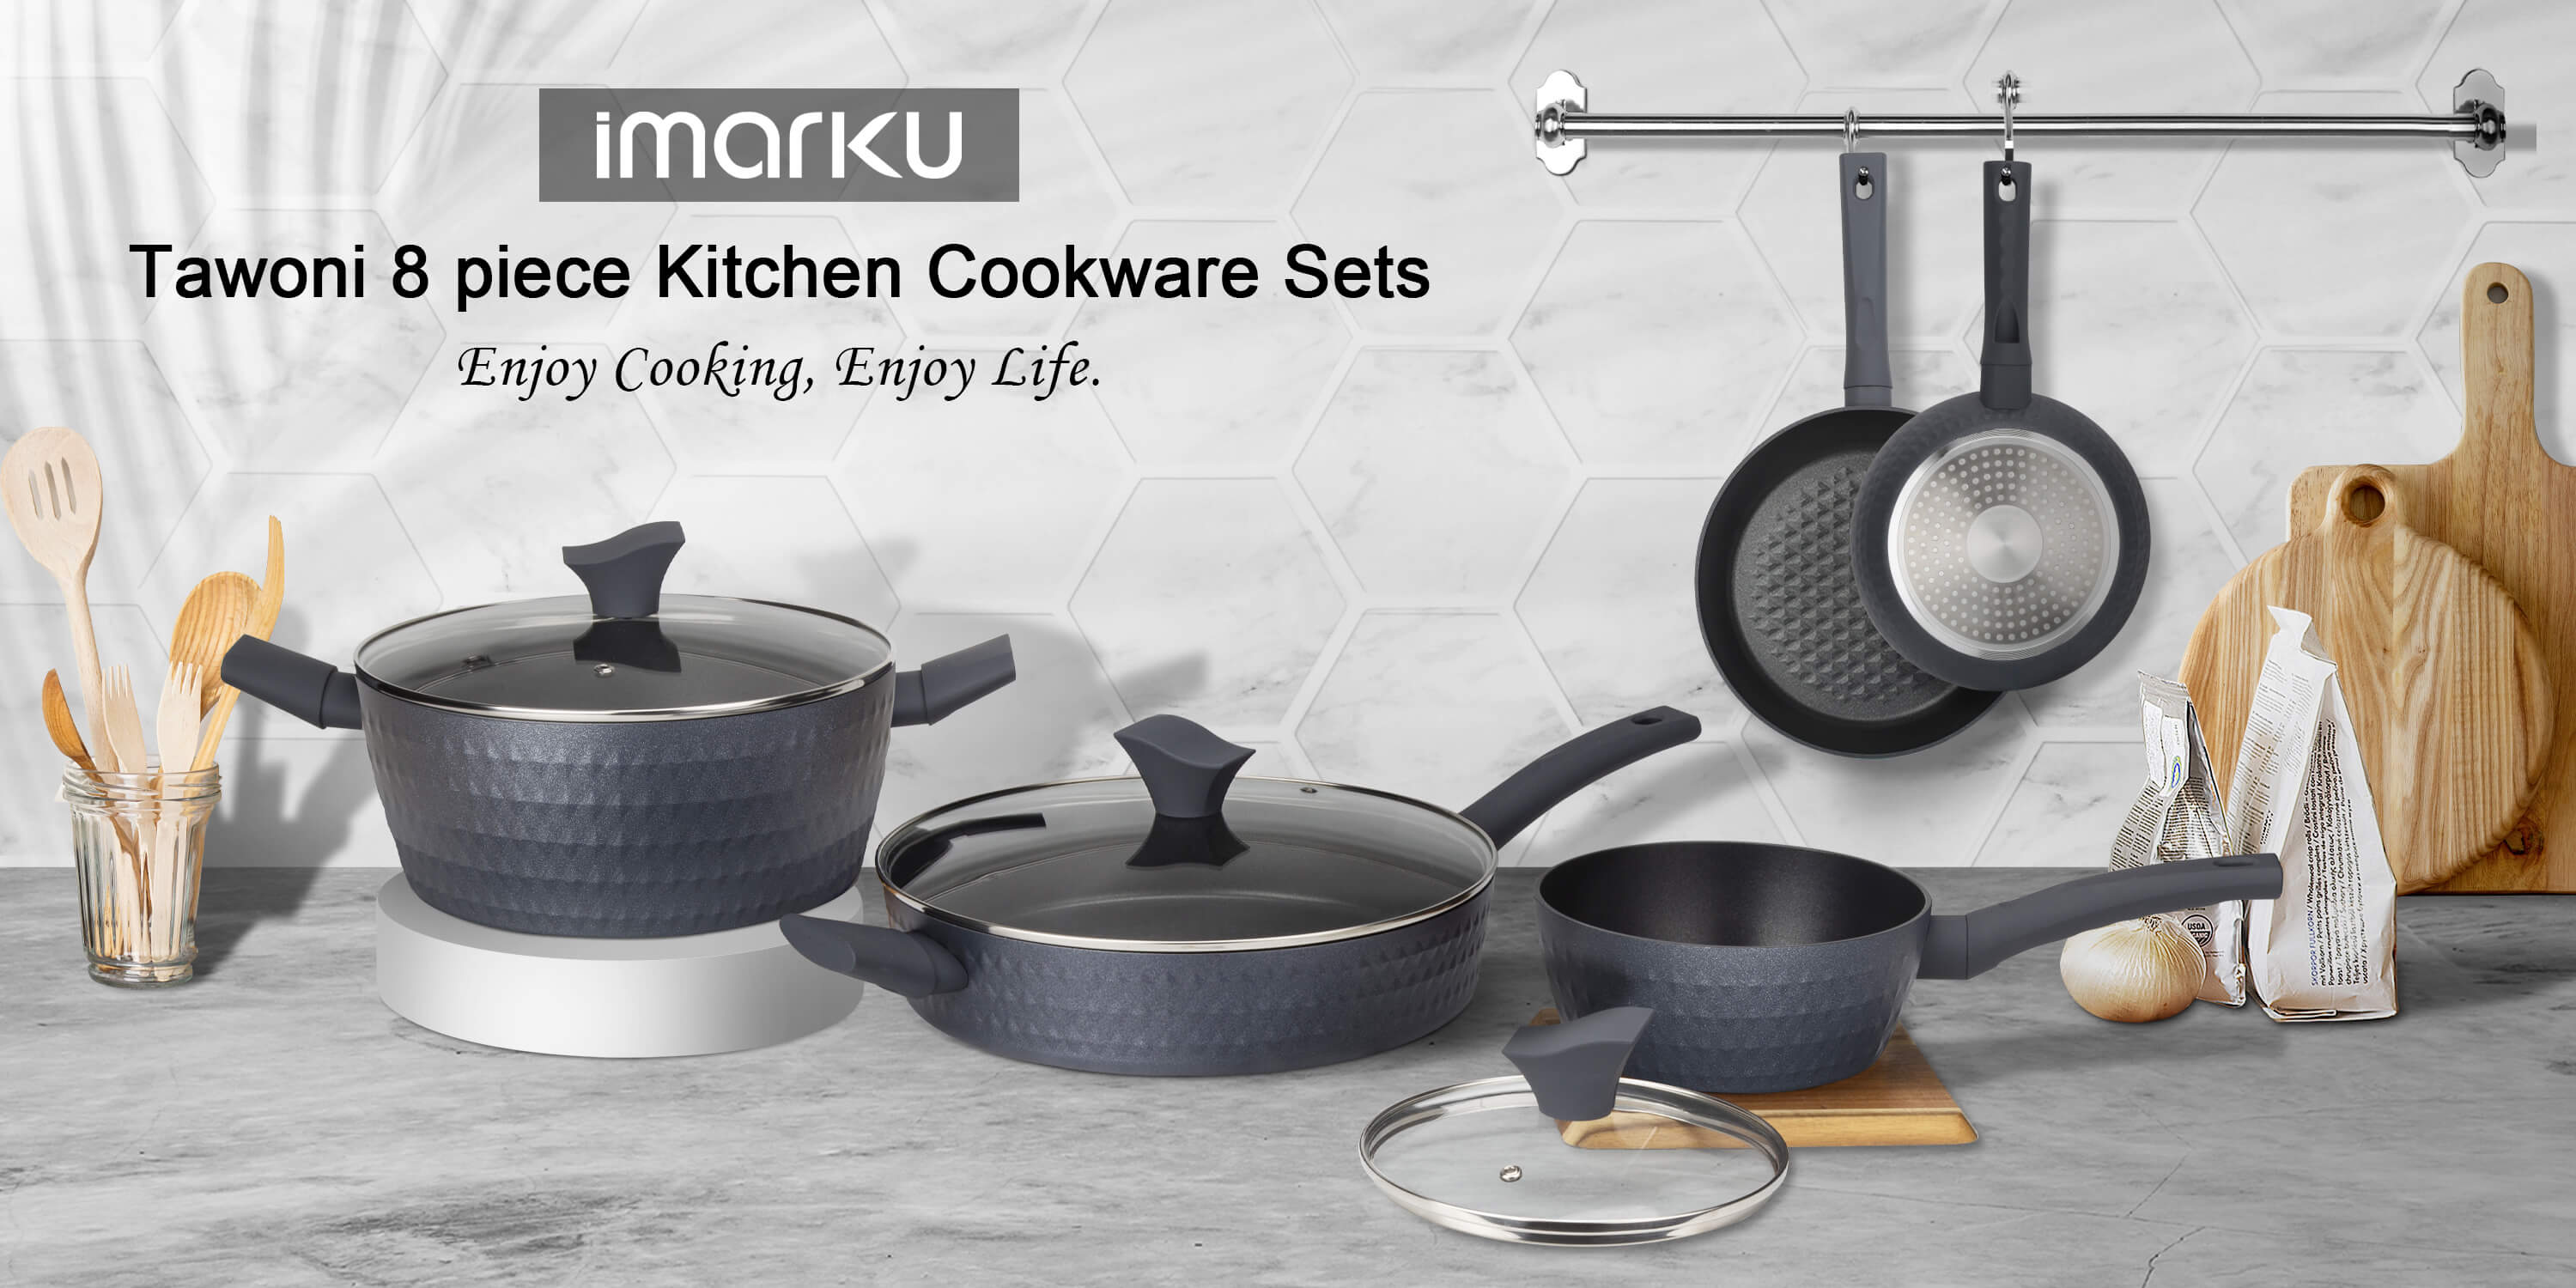 Best Cookware Sets for Induction Cooktops and Buying Guide in 2023 - IMARKU